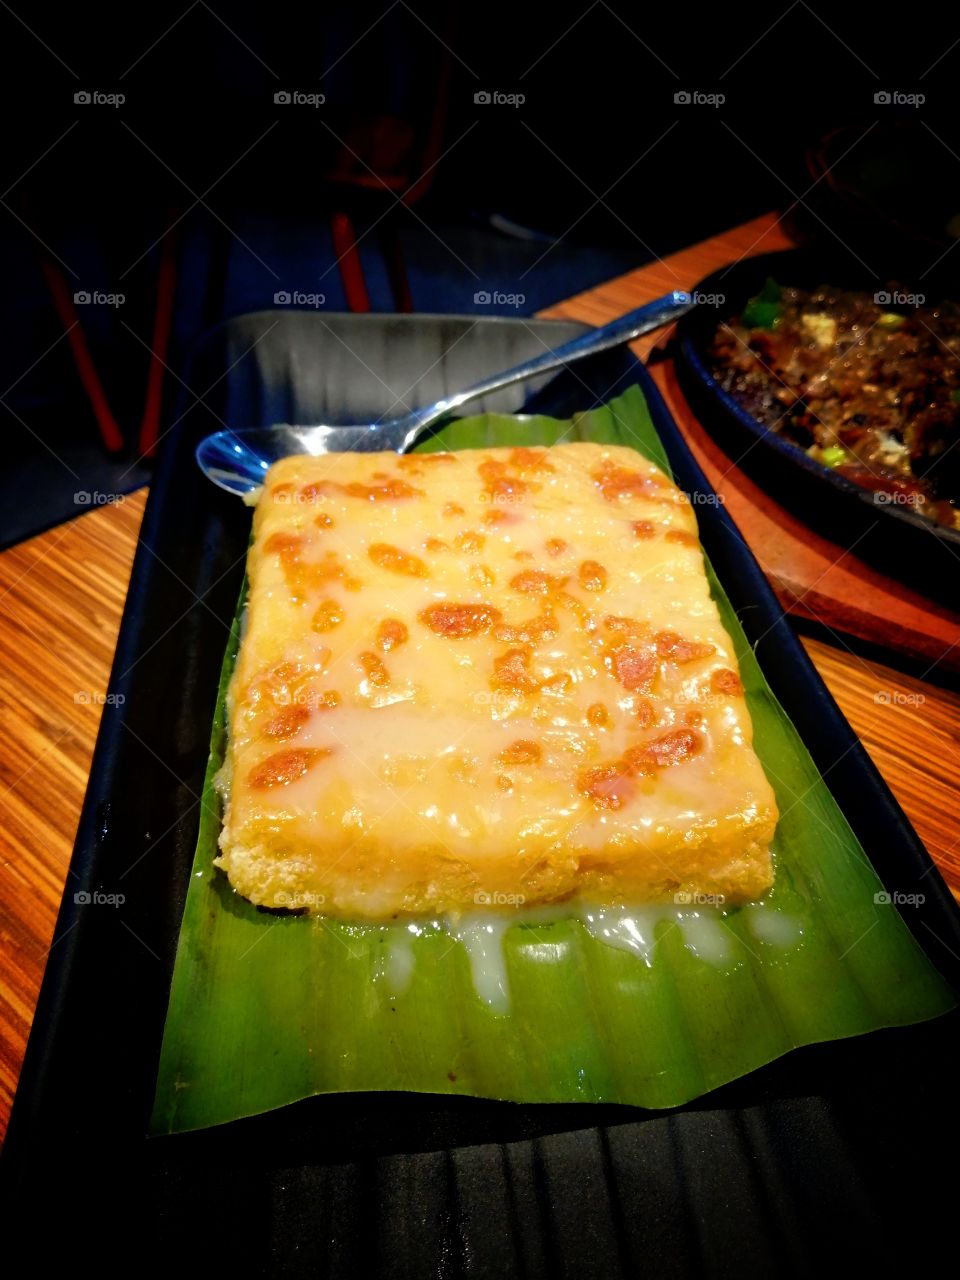 Sweet and delicious cassava cake served in banana leaf.